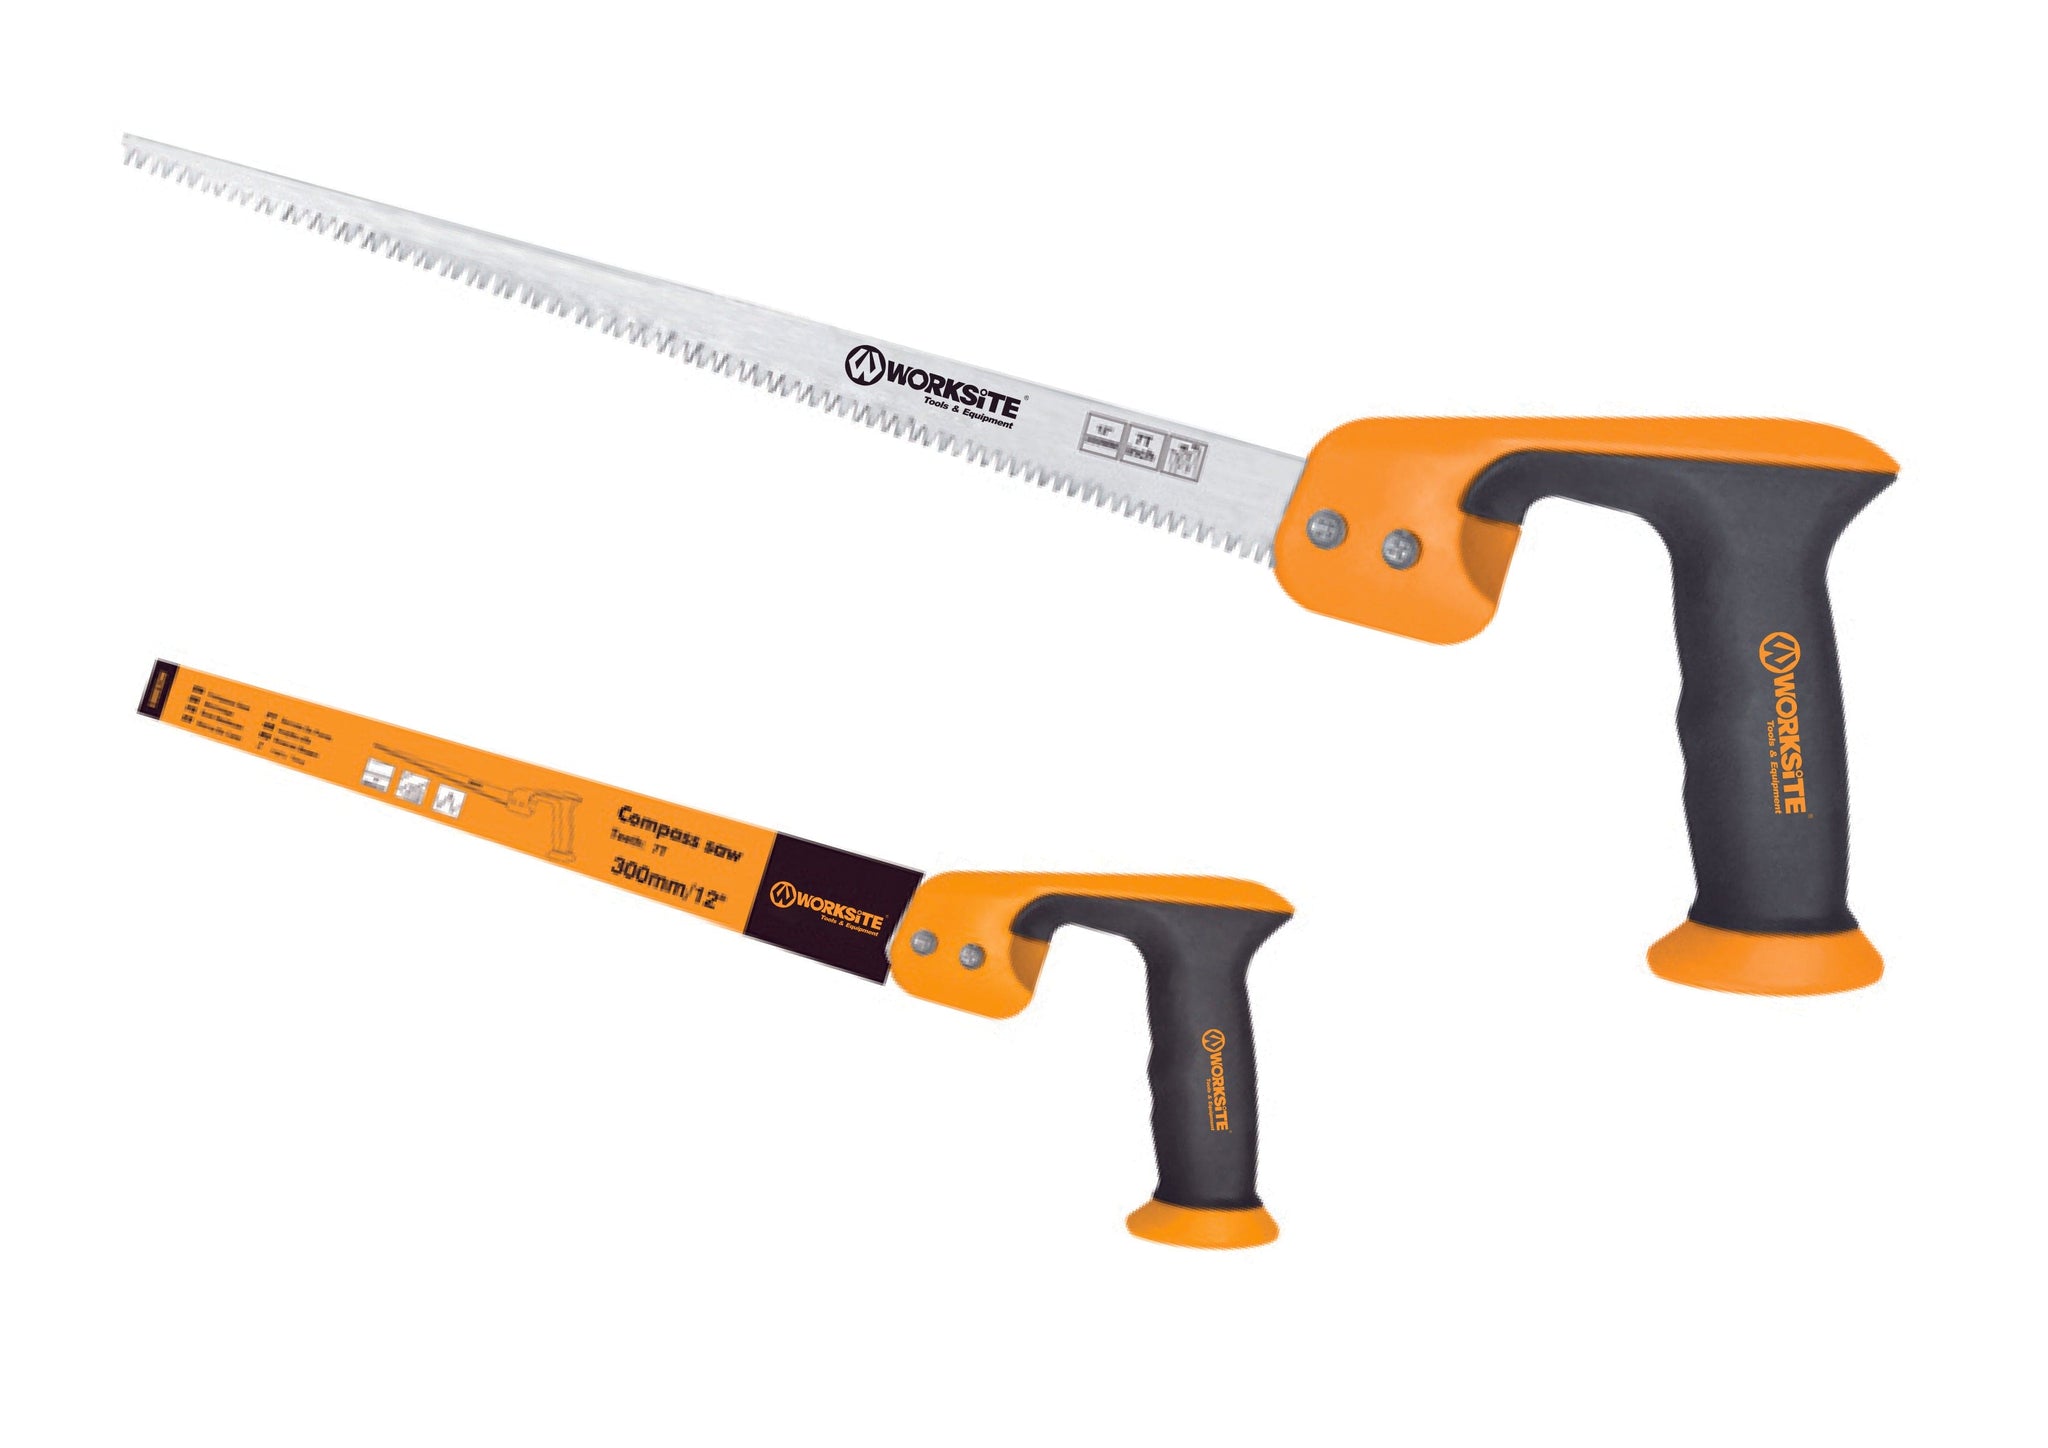 Worksite Compass Saw, Precision Saws for Wood, Saw for Plastic, Hand Saw for Drywall is designed for curve cuts and other working, carpentry, and hobby applications; Make quick and precise cuts across a variety of materials-WT6017